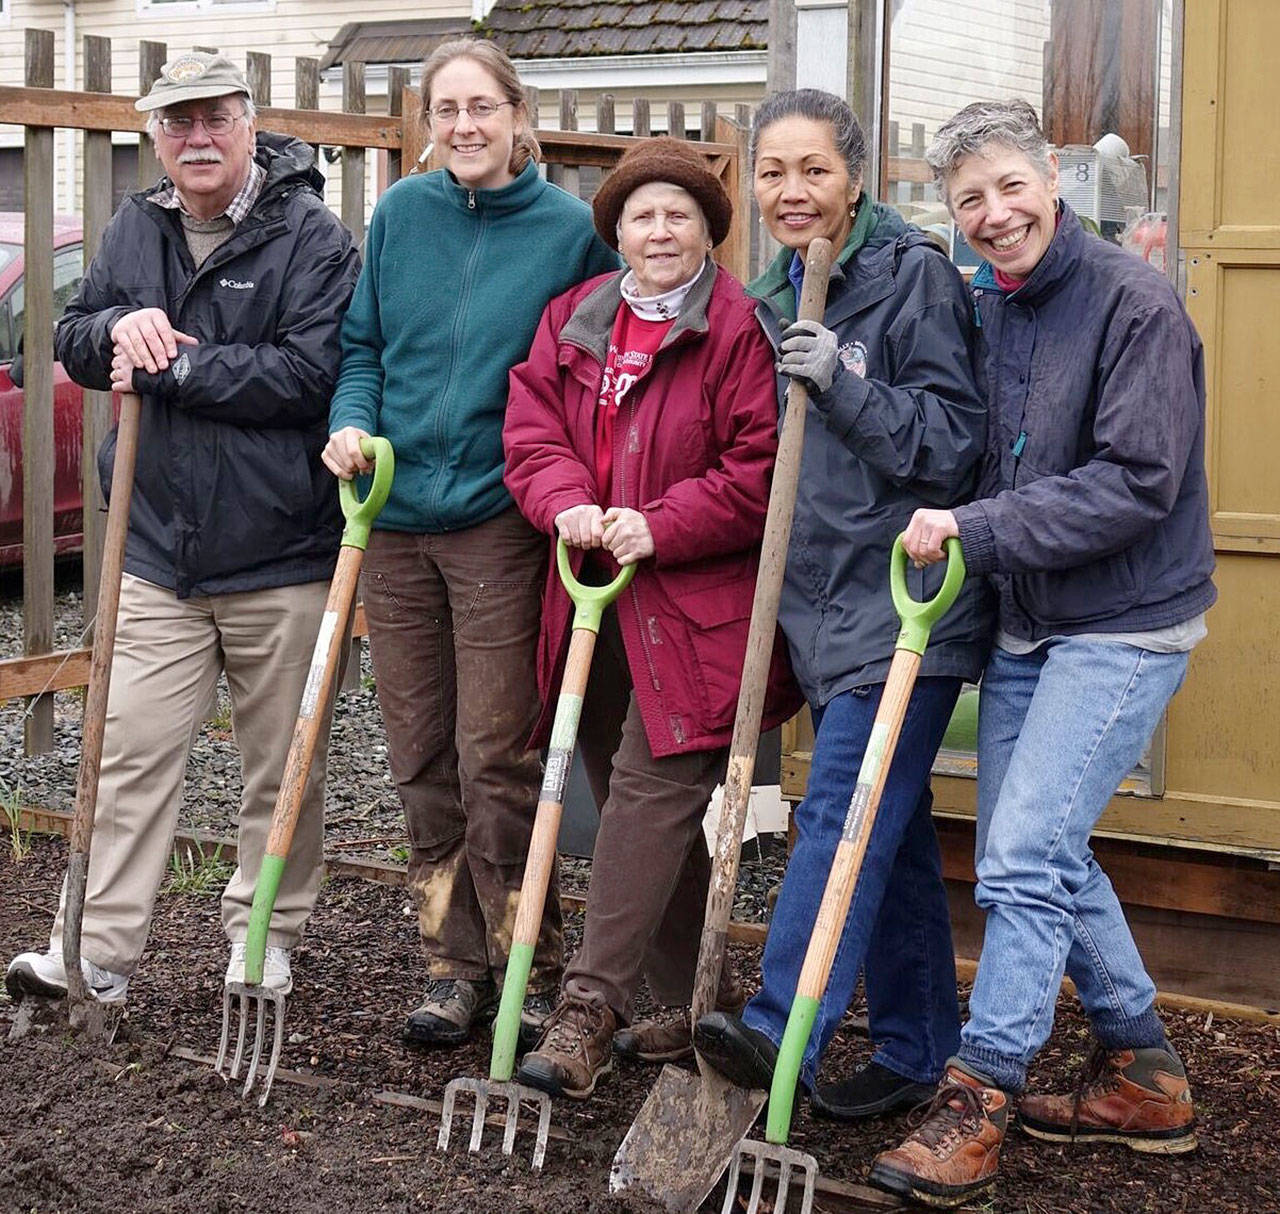 Veteran Master Gardeners Bob Cain, Laurel Moulton, Lois Bellamy, Audreen Williams and Jeanette Stehr-Green, from left, will lead a walk through the Fifth Street Community Garden this Saturday.